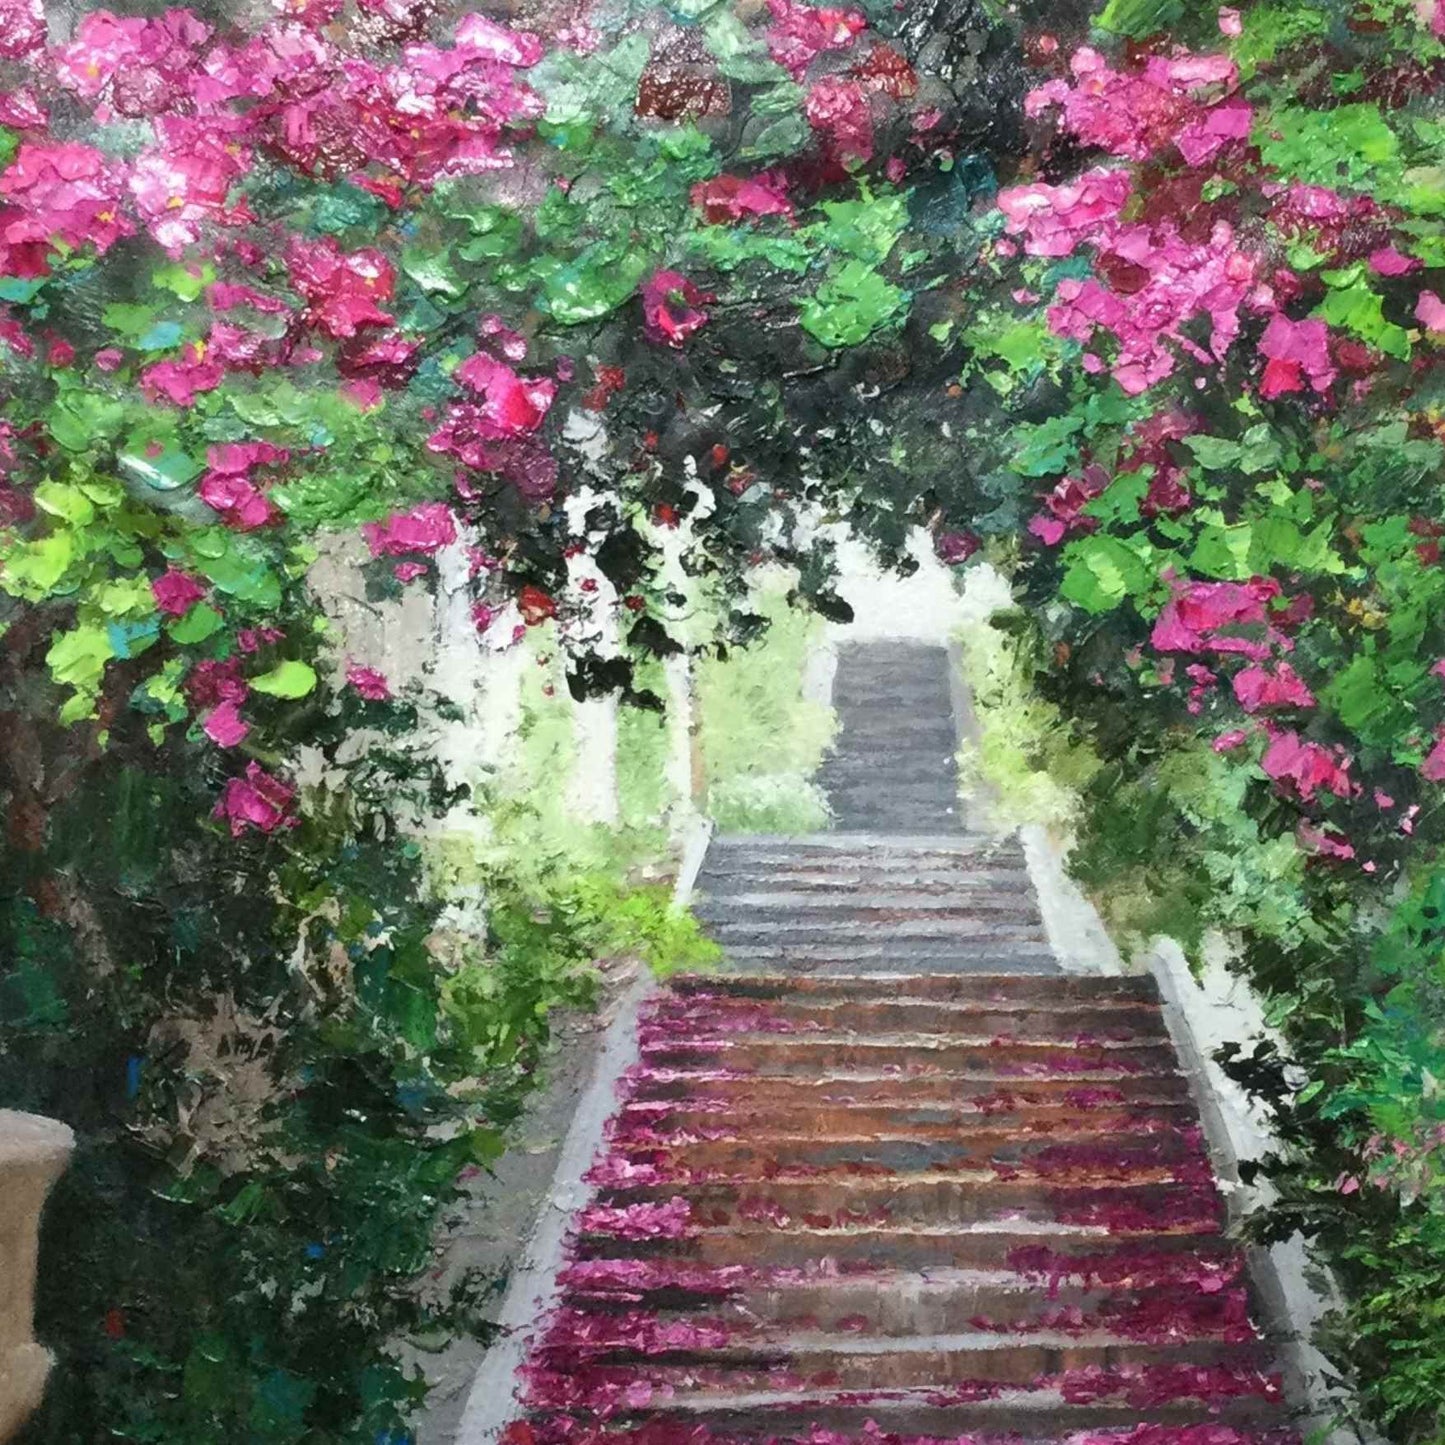 Bougainvillea Stair Painting 80x120 cm